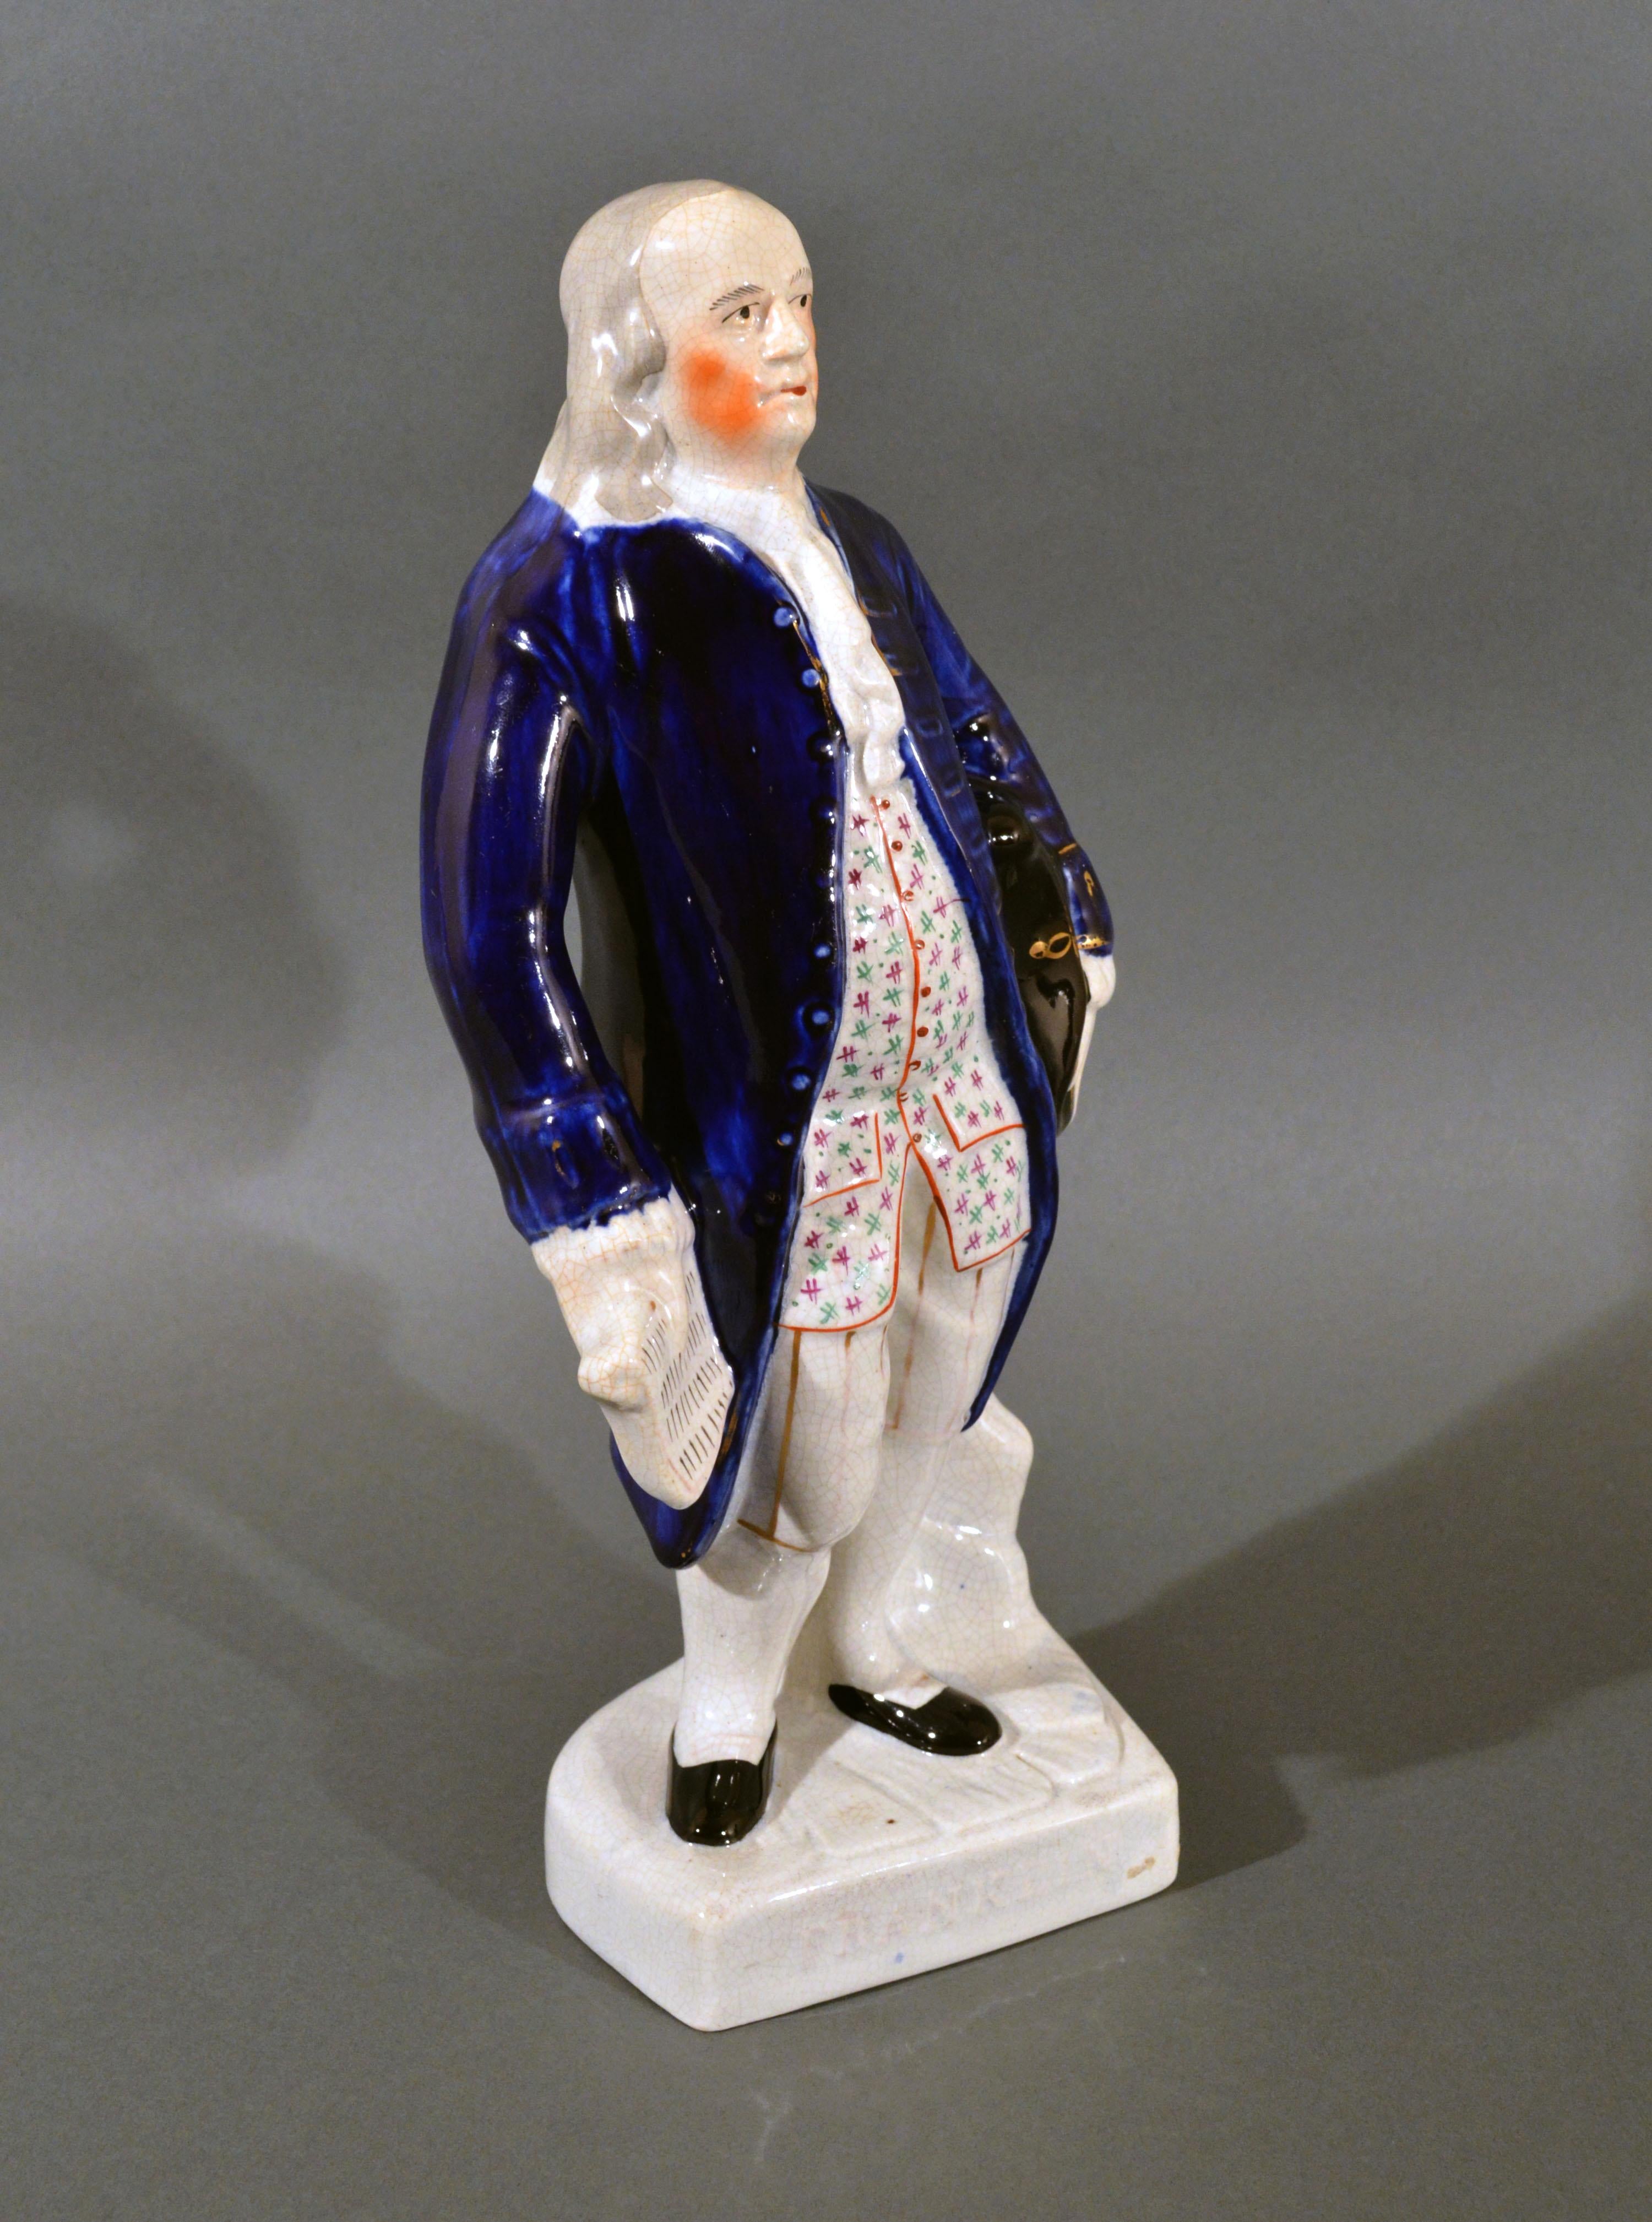 Large Staffordshire figure of Benjamin Franklin,
Named Franklin on base,
mid-19th century

This Staffordshire figure of Benjamin Franklin has a white base with the words Franklin molded in the front. Franklin stands with a Mazarin blue jacket and a